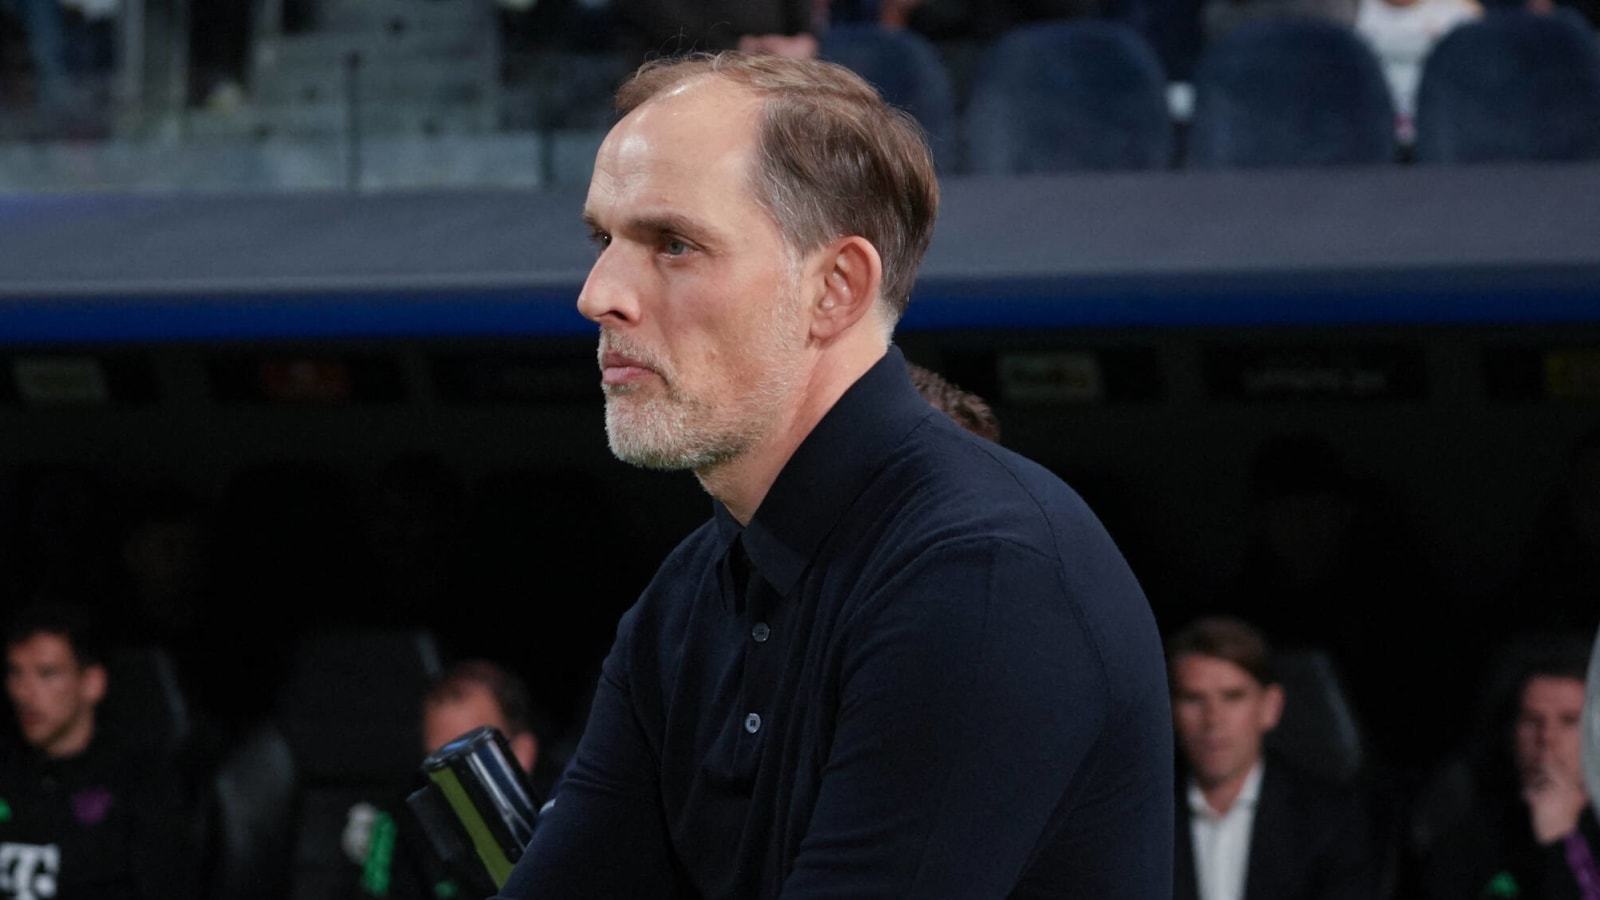 Thomas Tuchel comments on his future amid Manchester United links